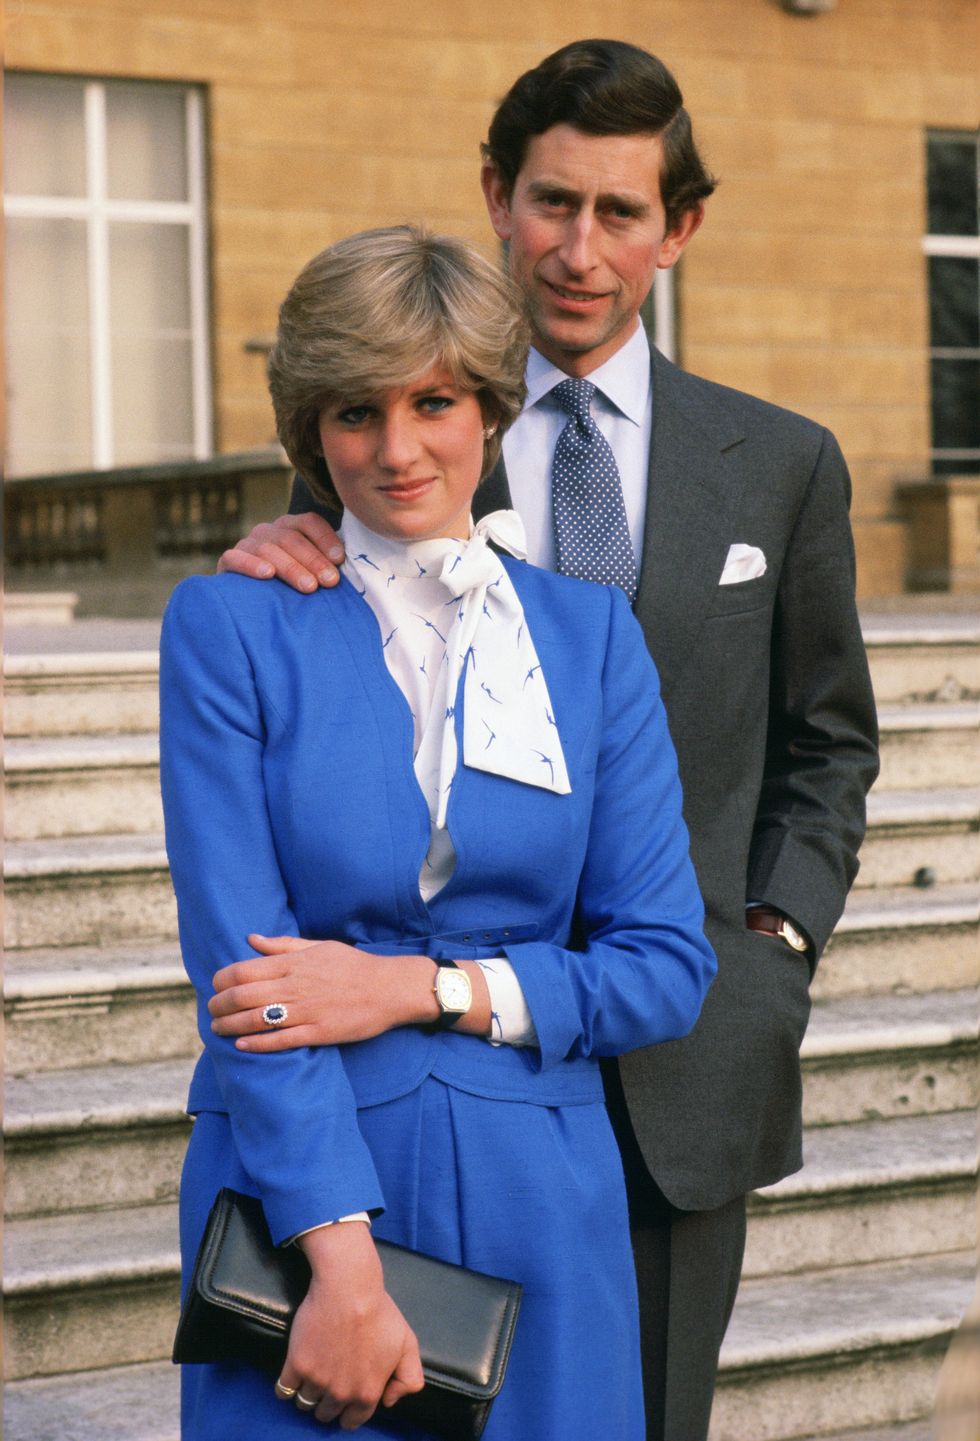 lady diana spencer later to become princess of wales revea